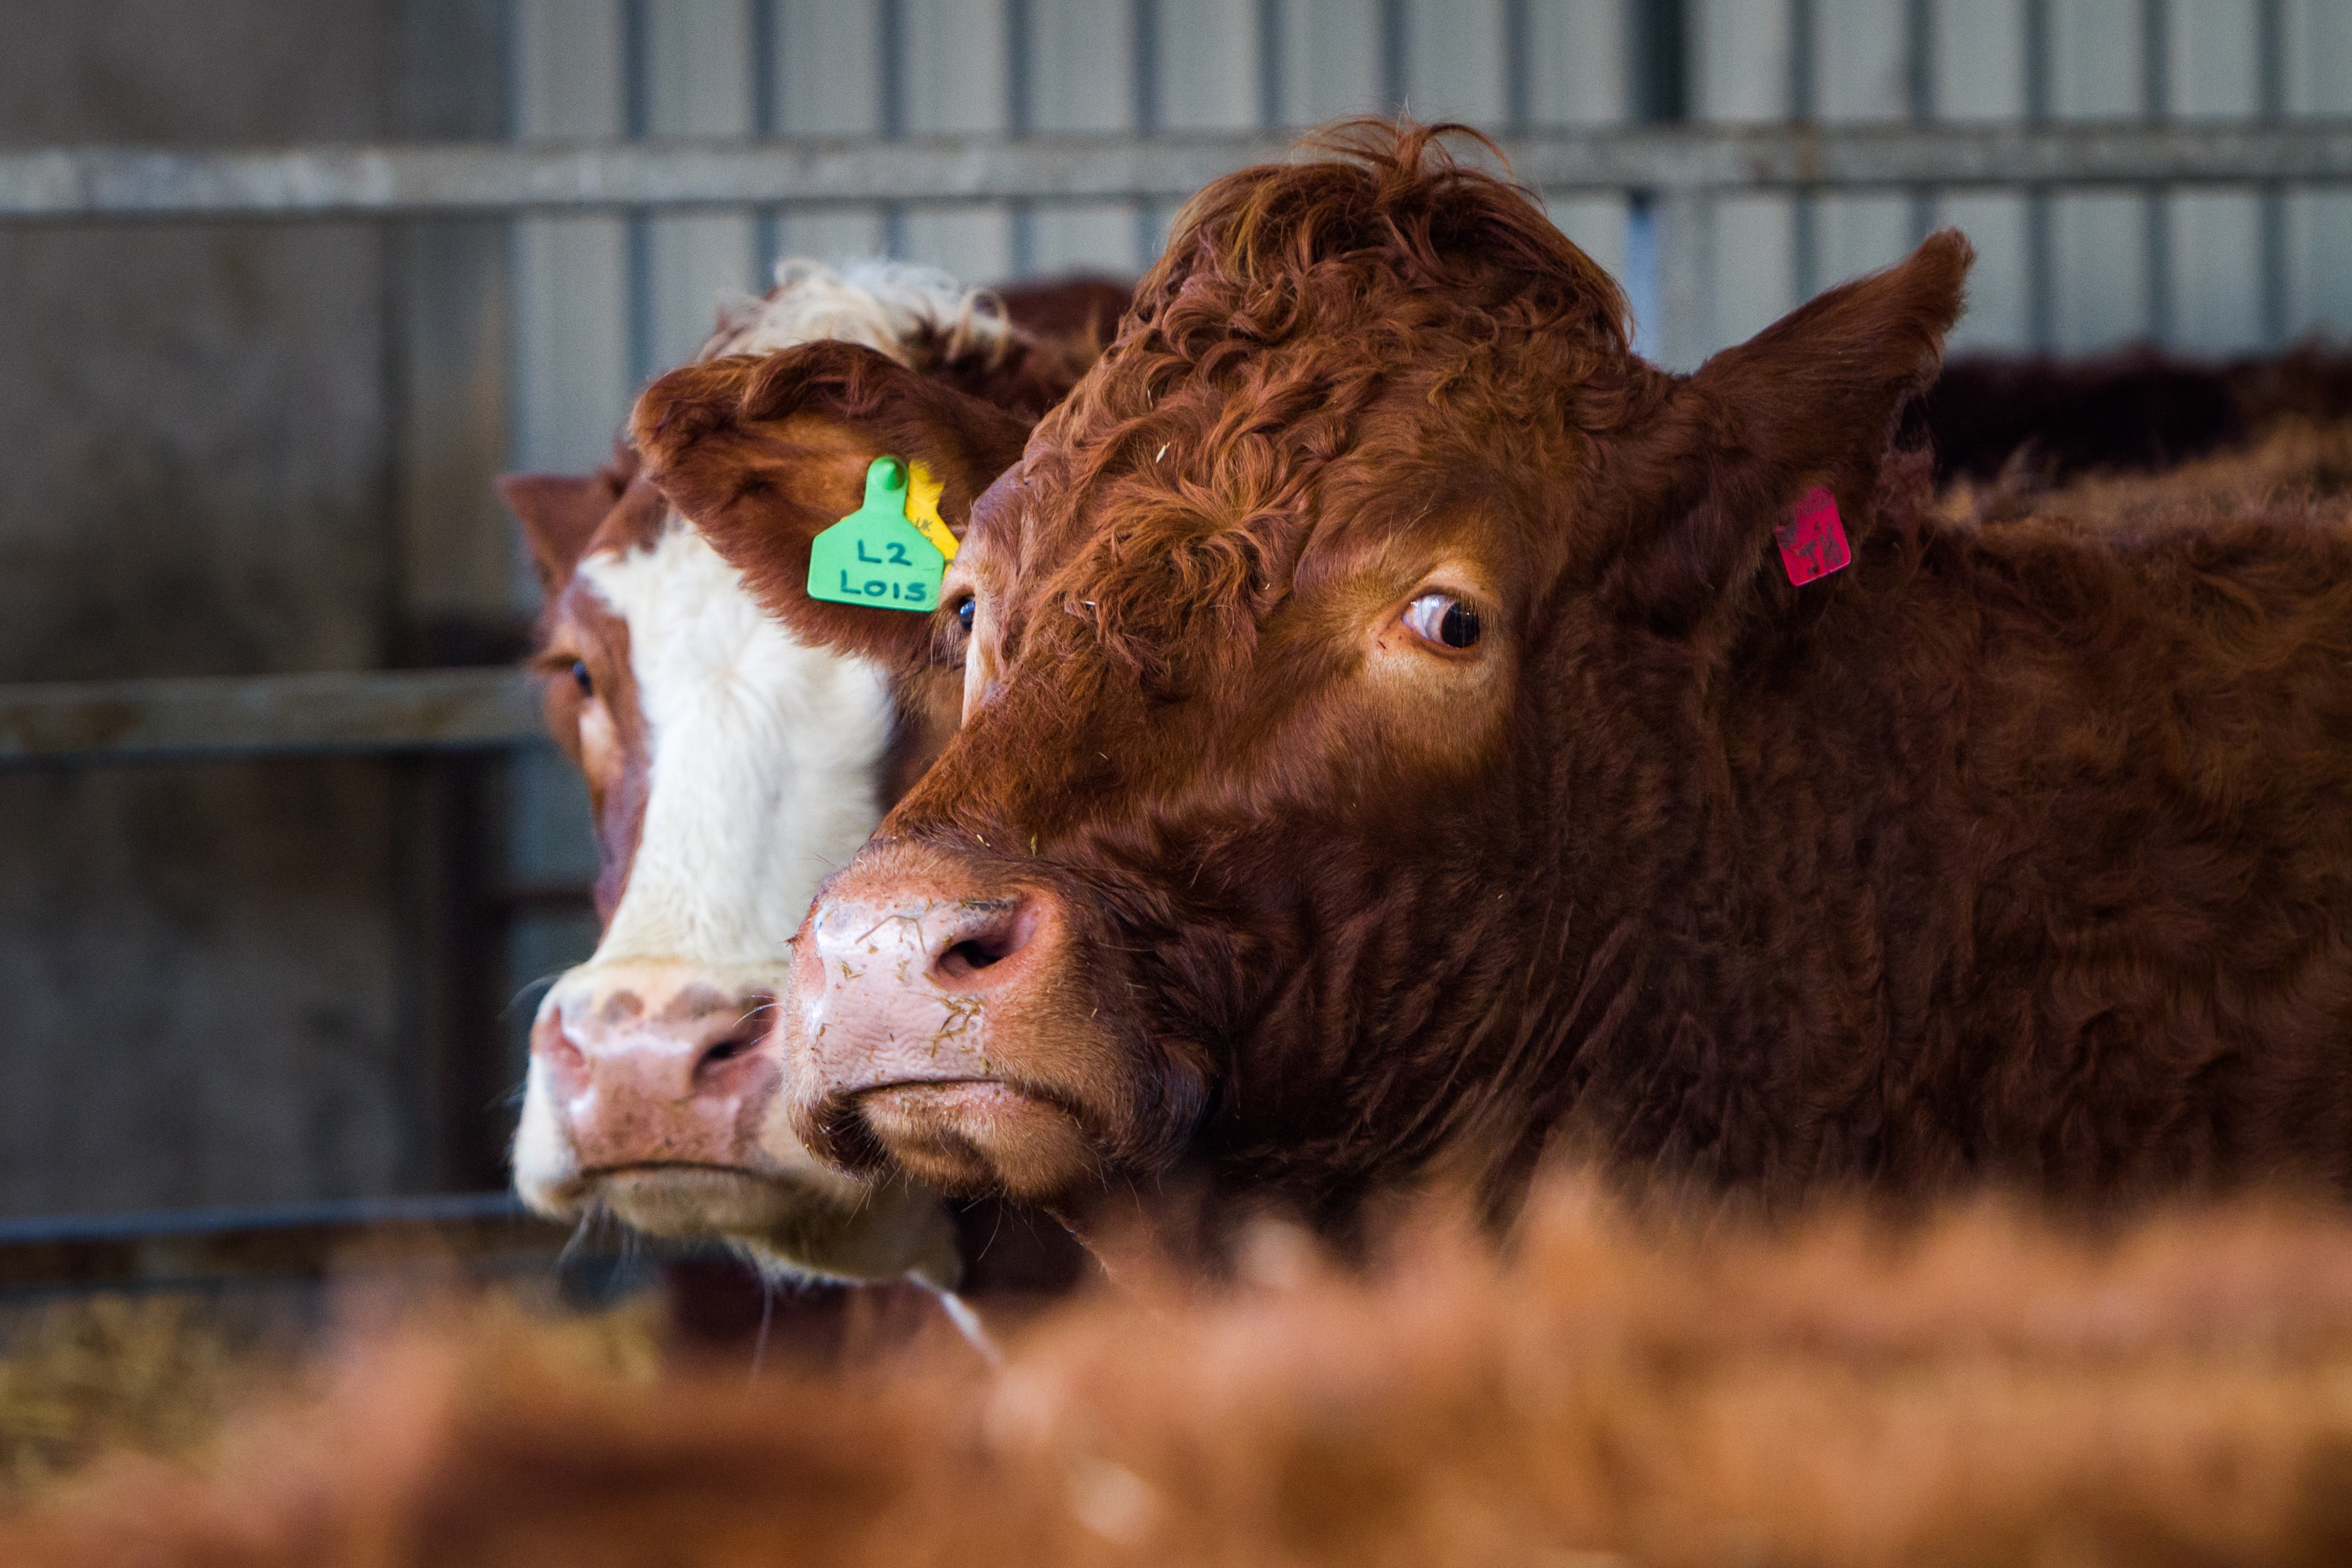 The UK and Republic of Ireland have strong trade links for both livestock and red meat products